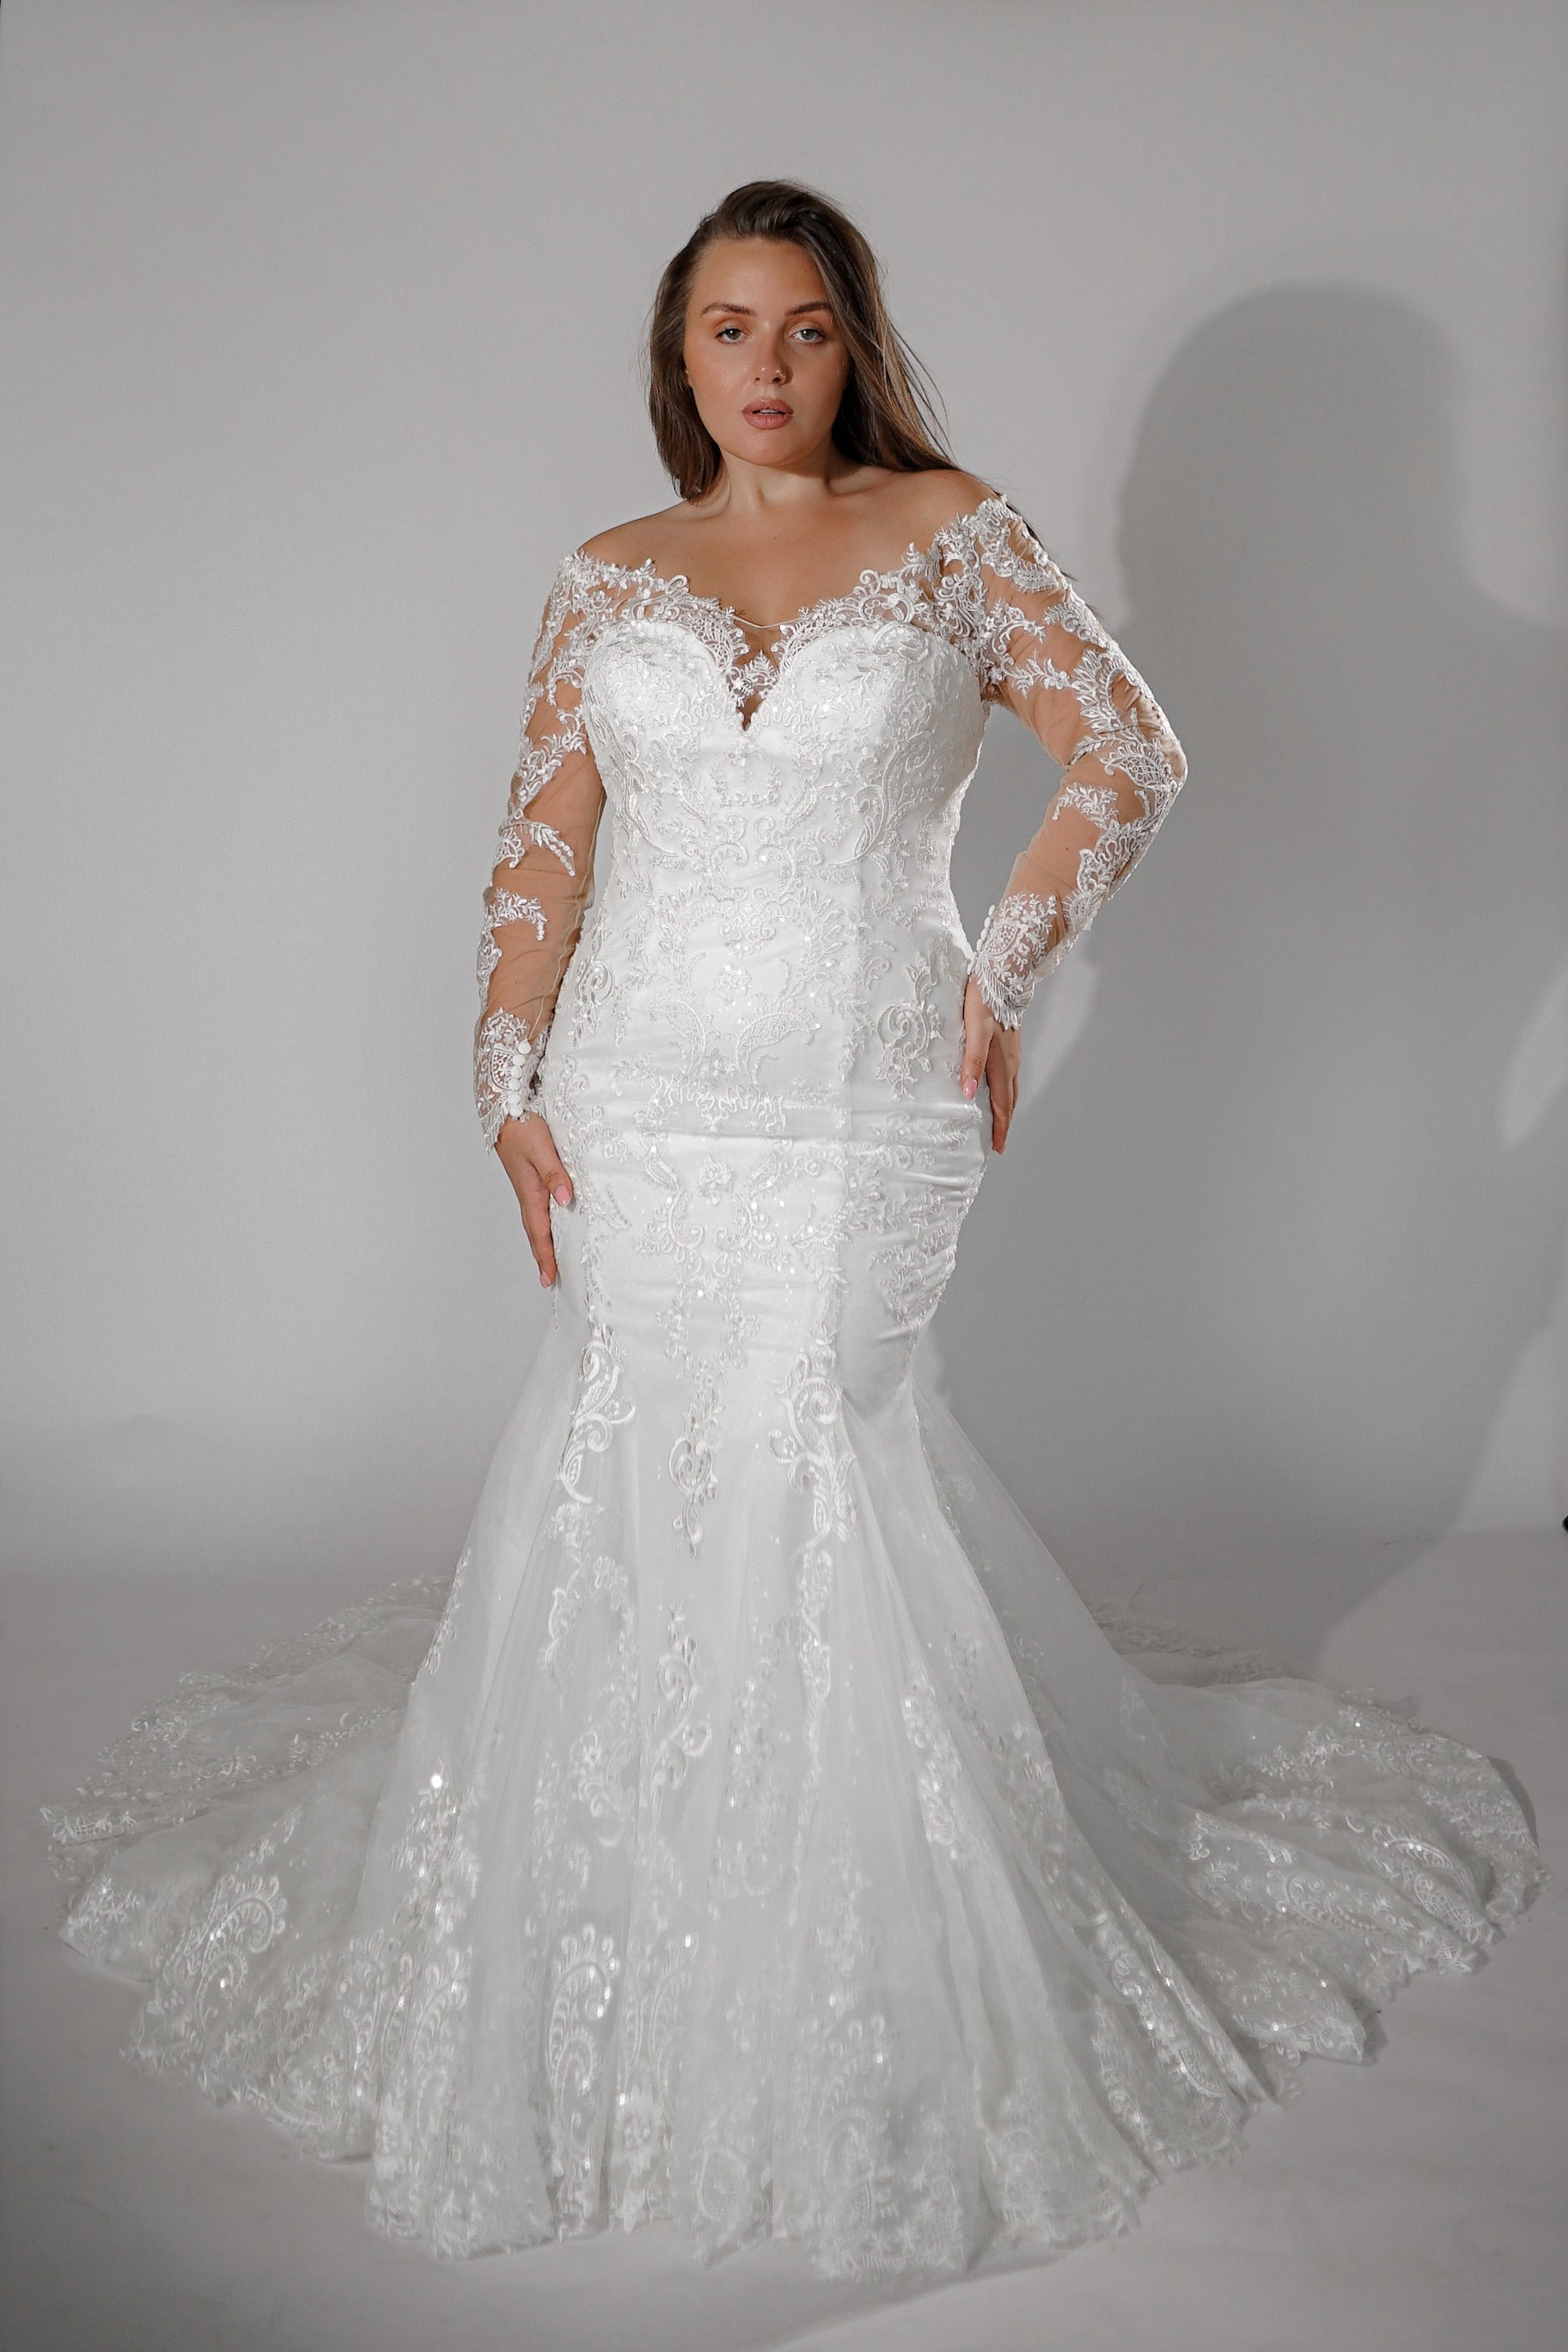 Yannia - Selena Huan French Chantilly lace strapless mermaid gown -  SelenaHuanBridal